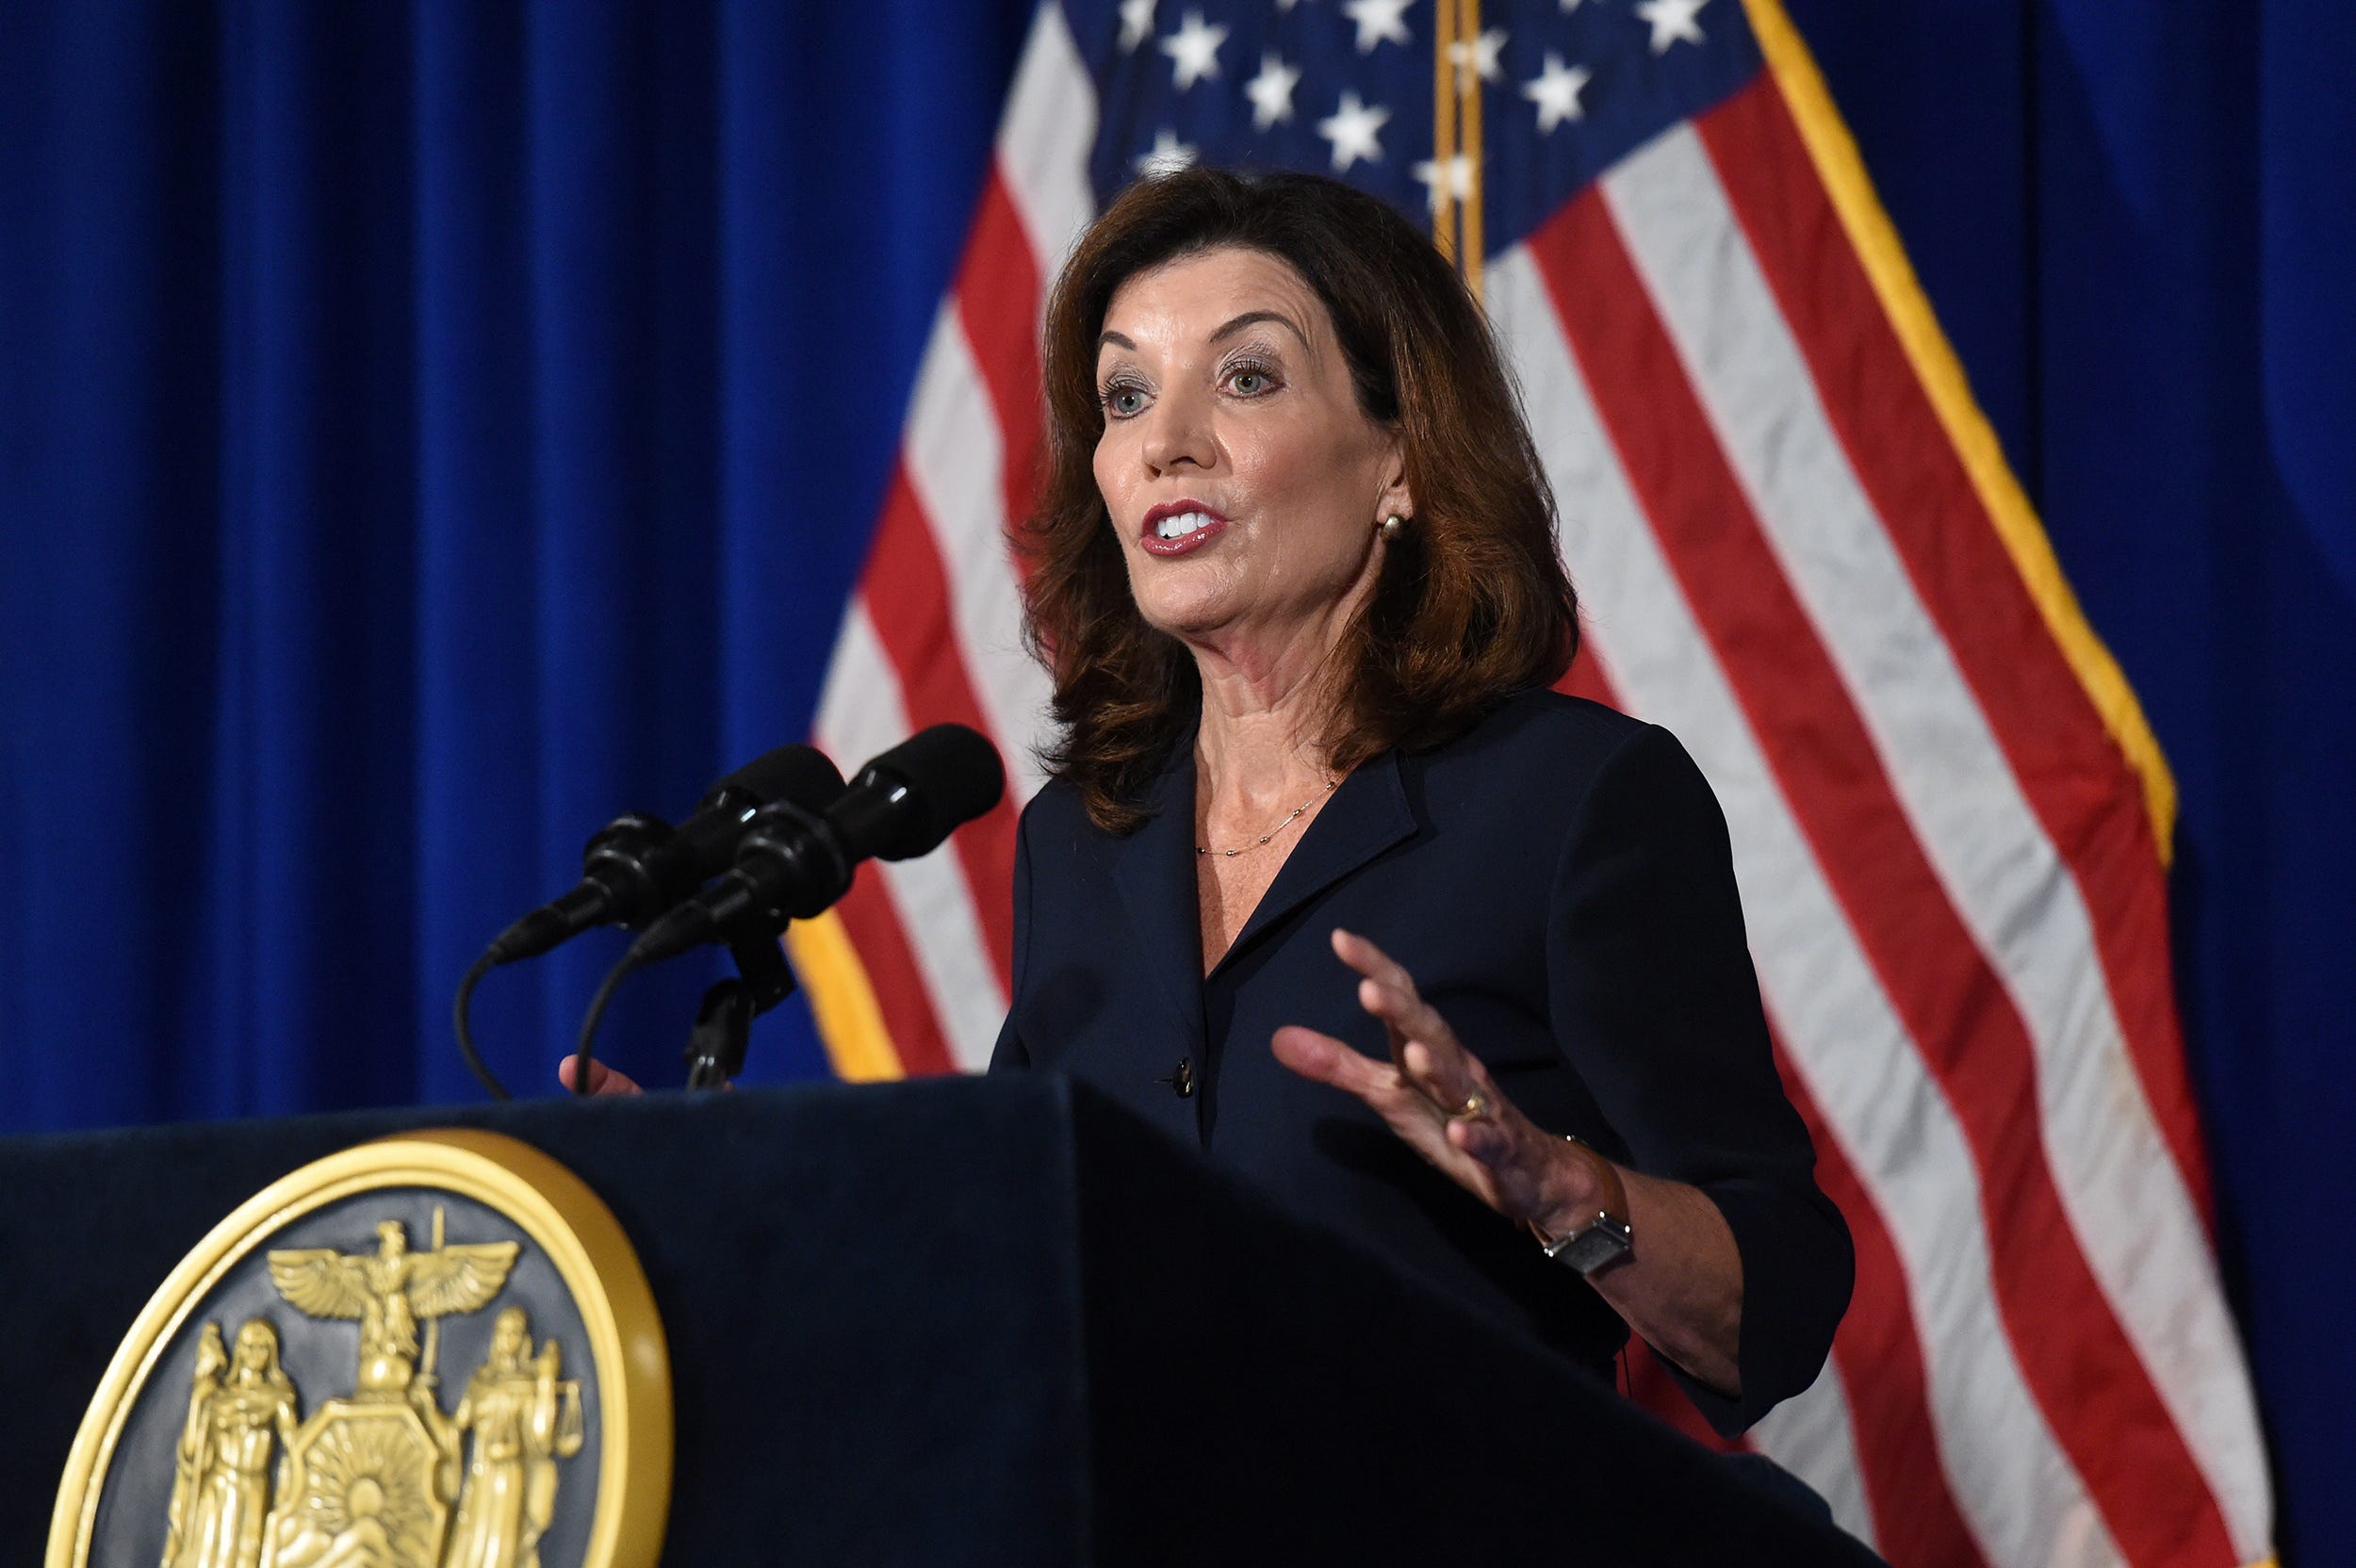 New York Lieutenant Governor Kathy Hochul speaks during a news conference the day after Governor Andrew Cuomo announced his resignation at the New York State Capitol, in Albany, New York, U.S., August 11, 2021.